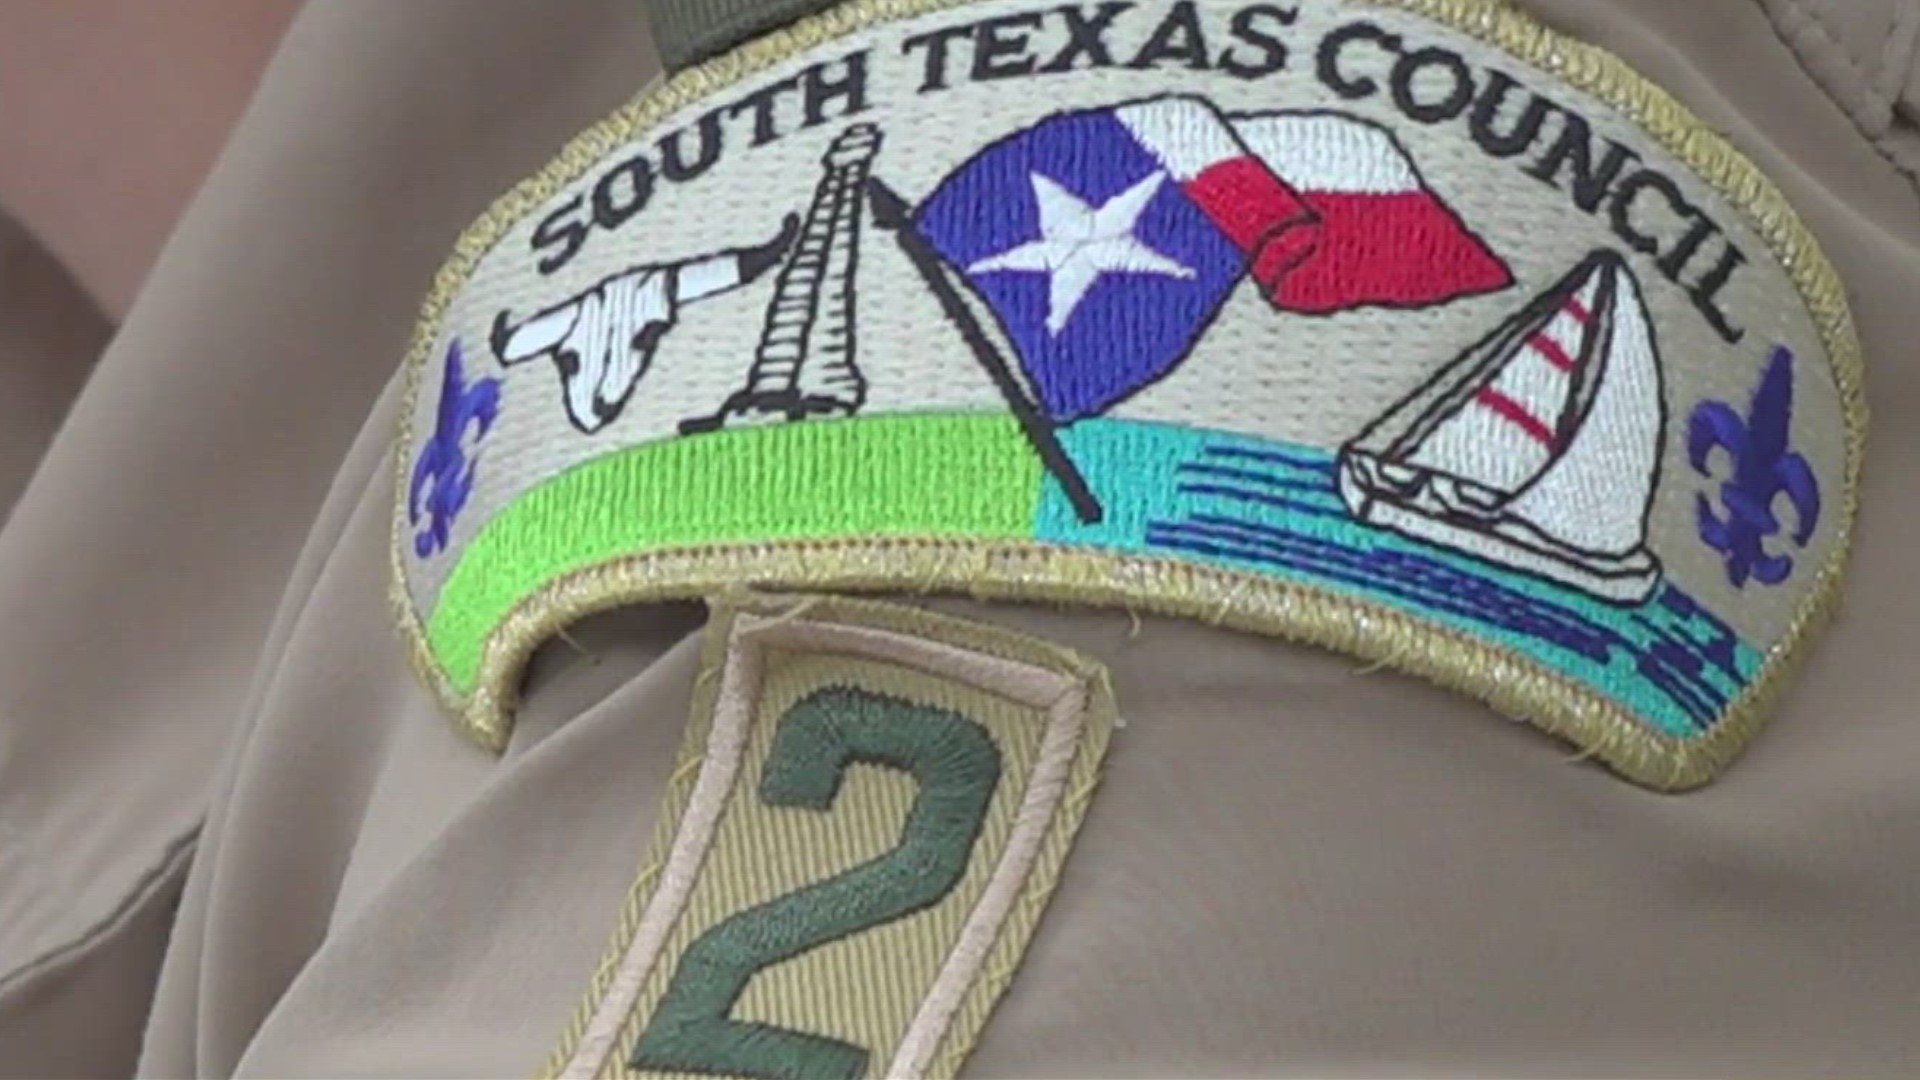 Corpus Christi's oldest scout troop is experiencing dwindling numbers, with a troop of 30 -- now down to just five members.